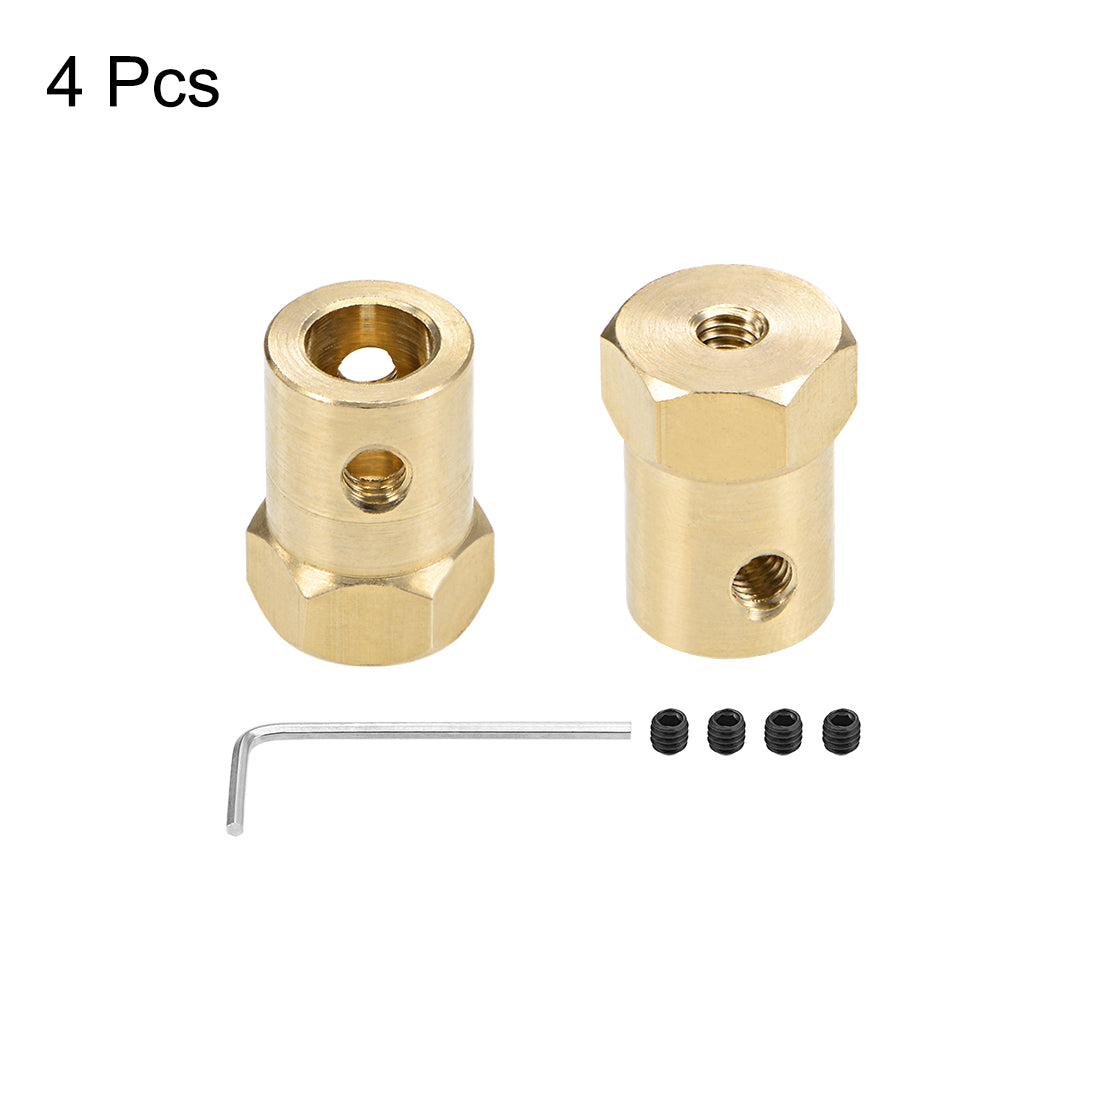 Uxcell Uxcell Hex Coupler 3mm Bore Motor Hex Brass Shaft Coupling Connector for Car Wheels Tires Shaft Motor 4pcs